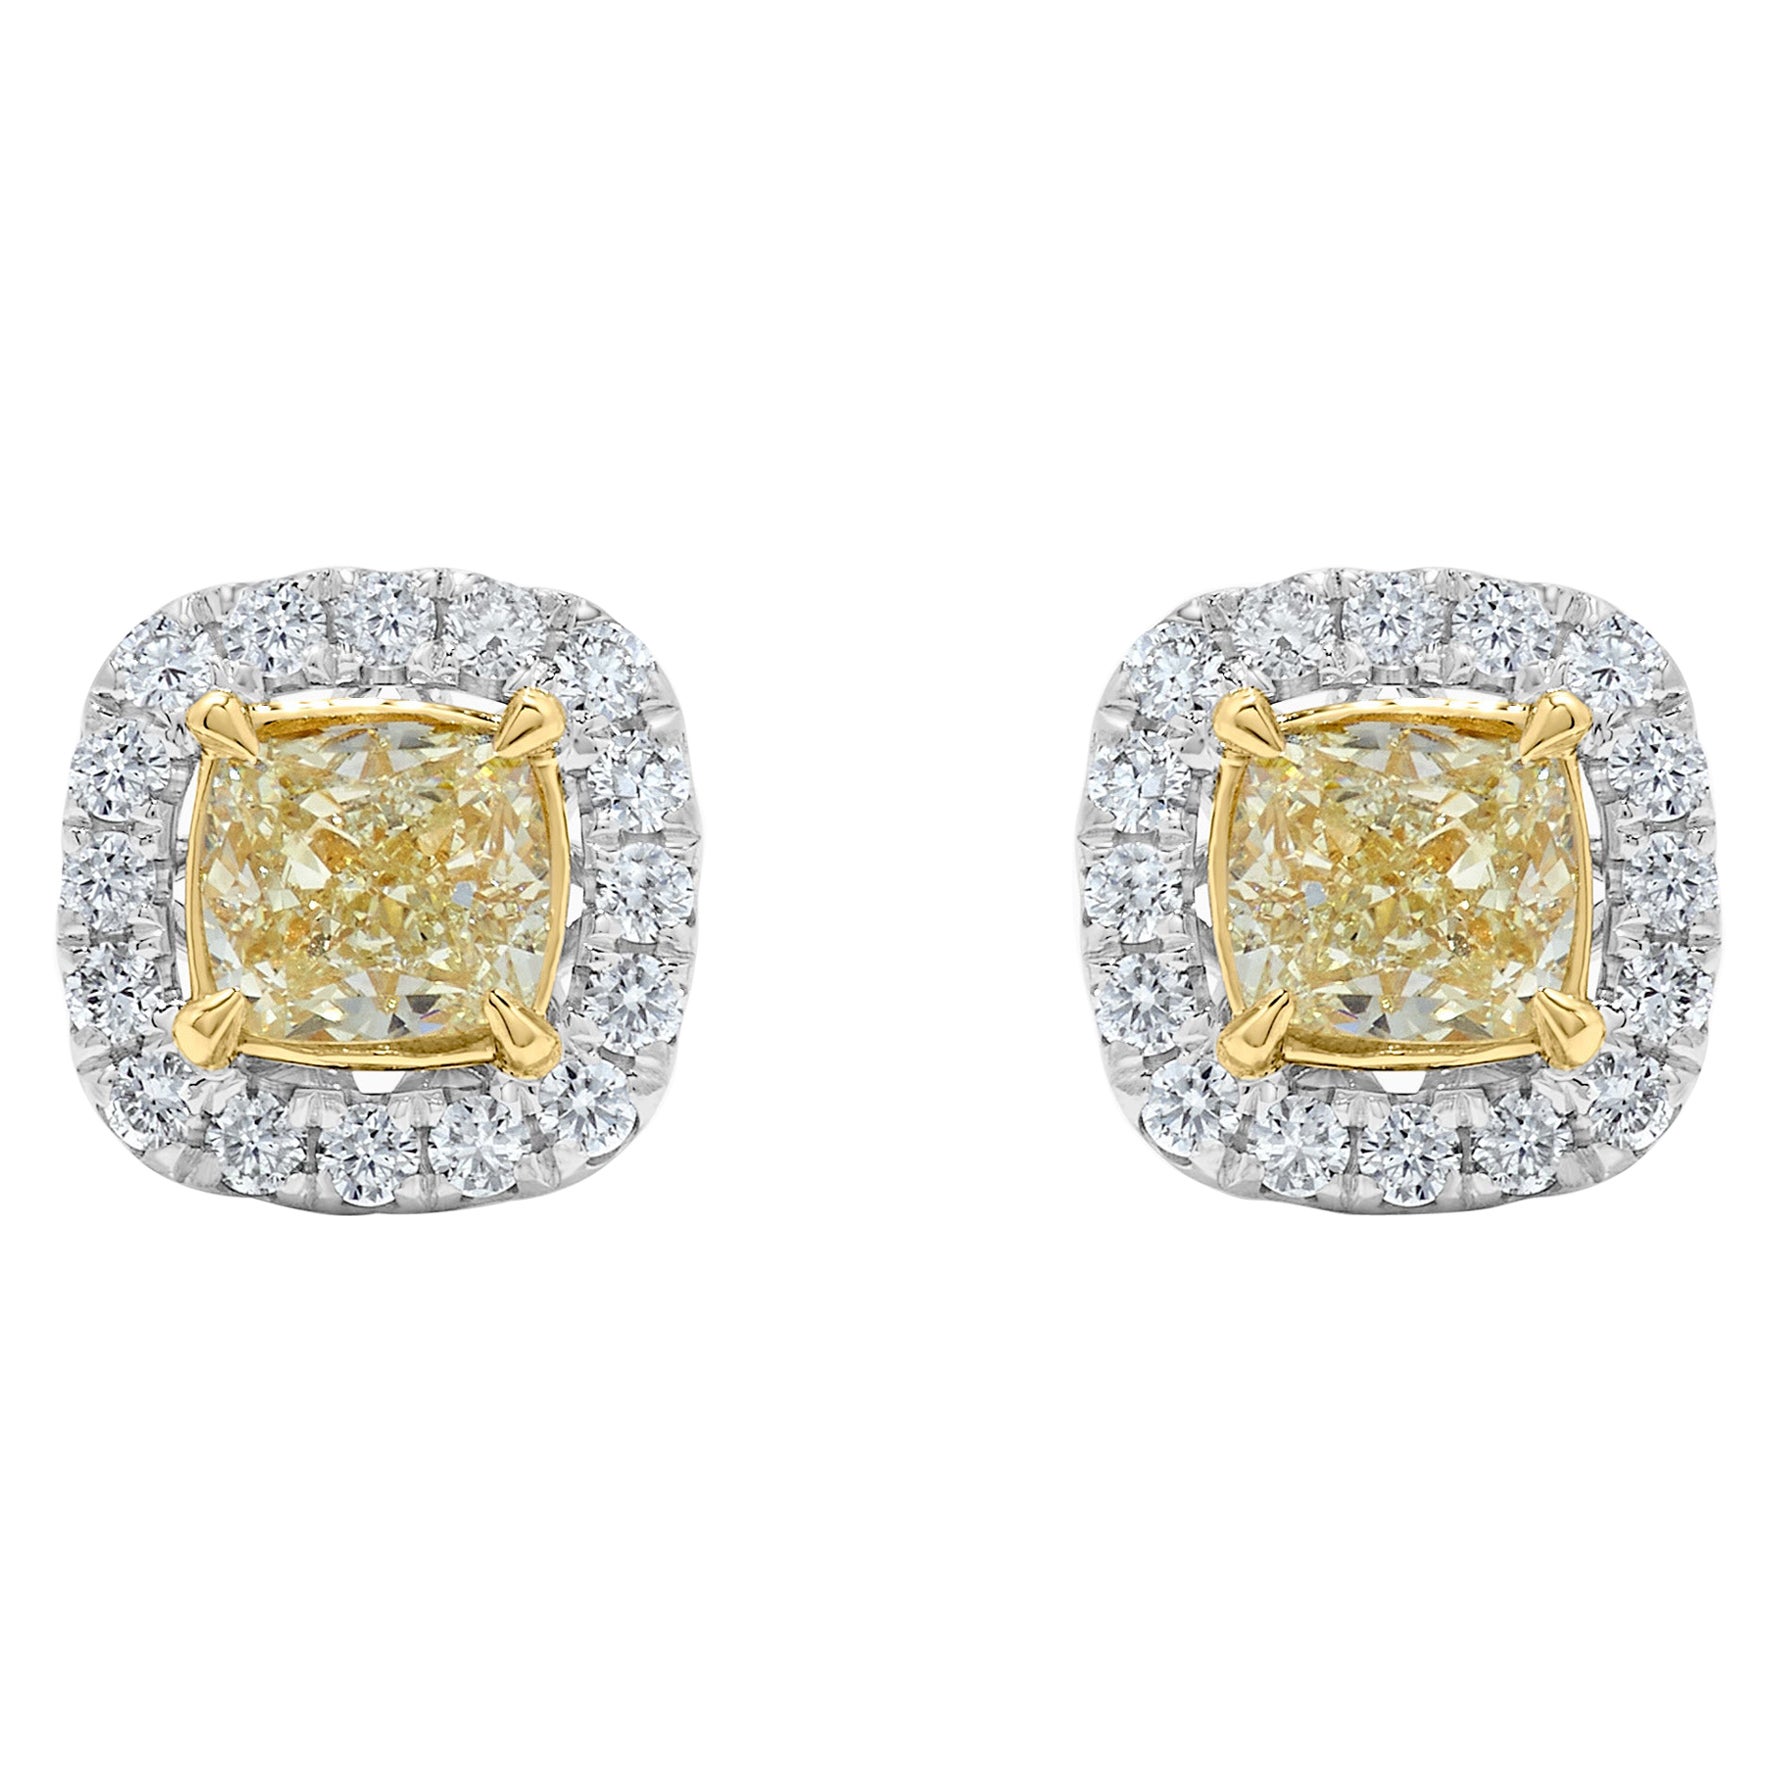 Natural Yellow Cushion Diamond 1.84 Carat TW Gold Stud Earrings For Sale